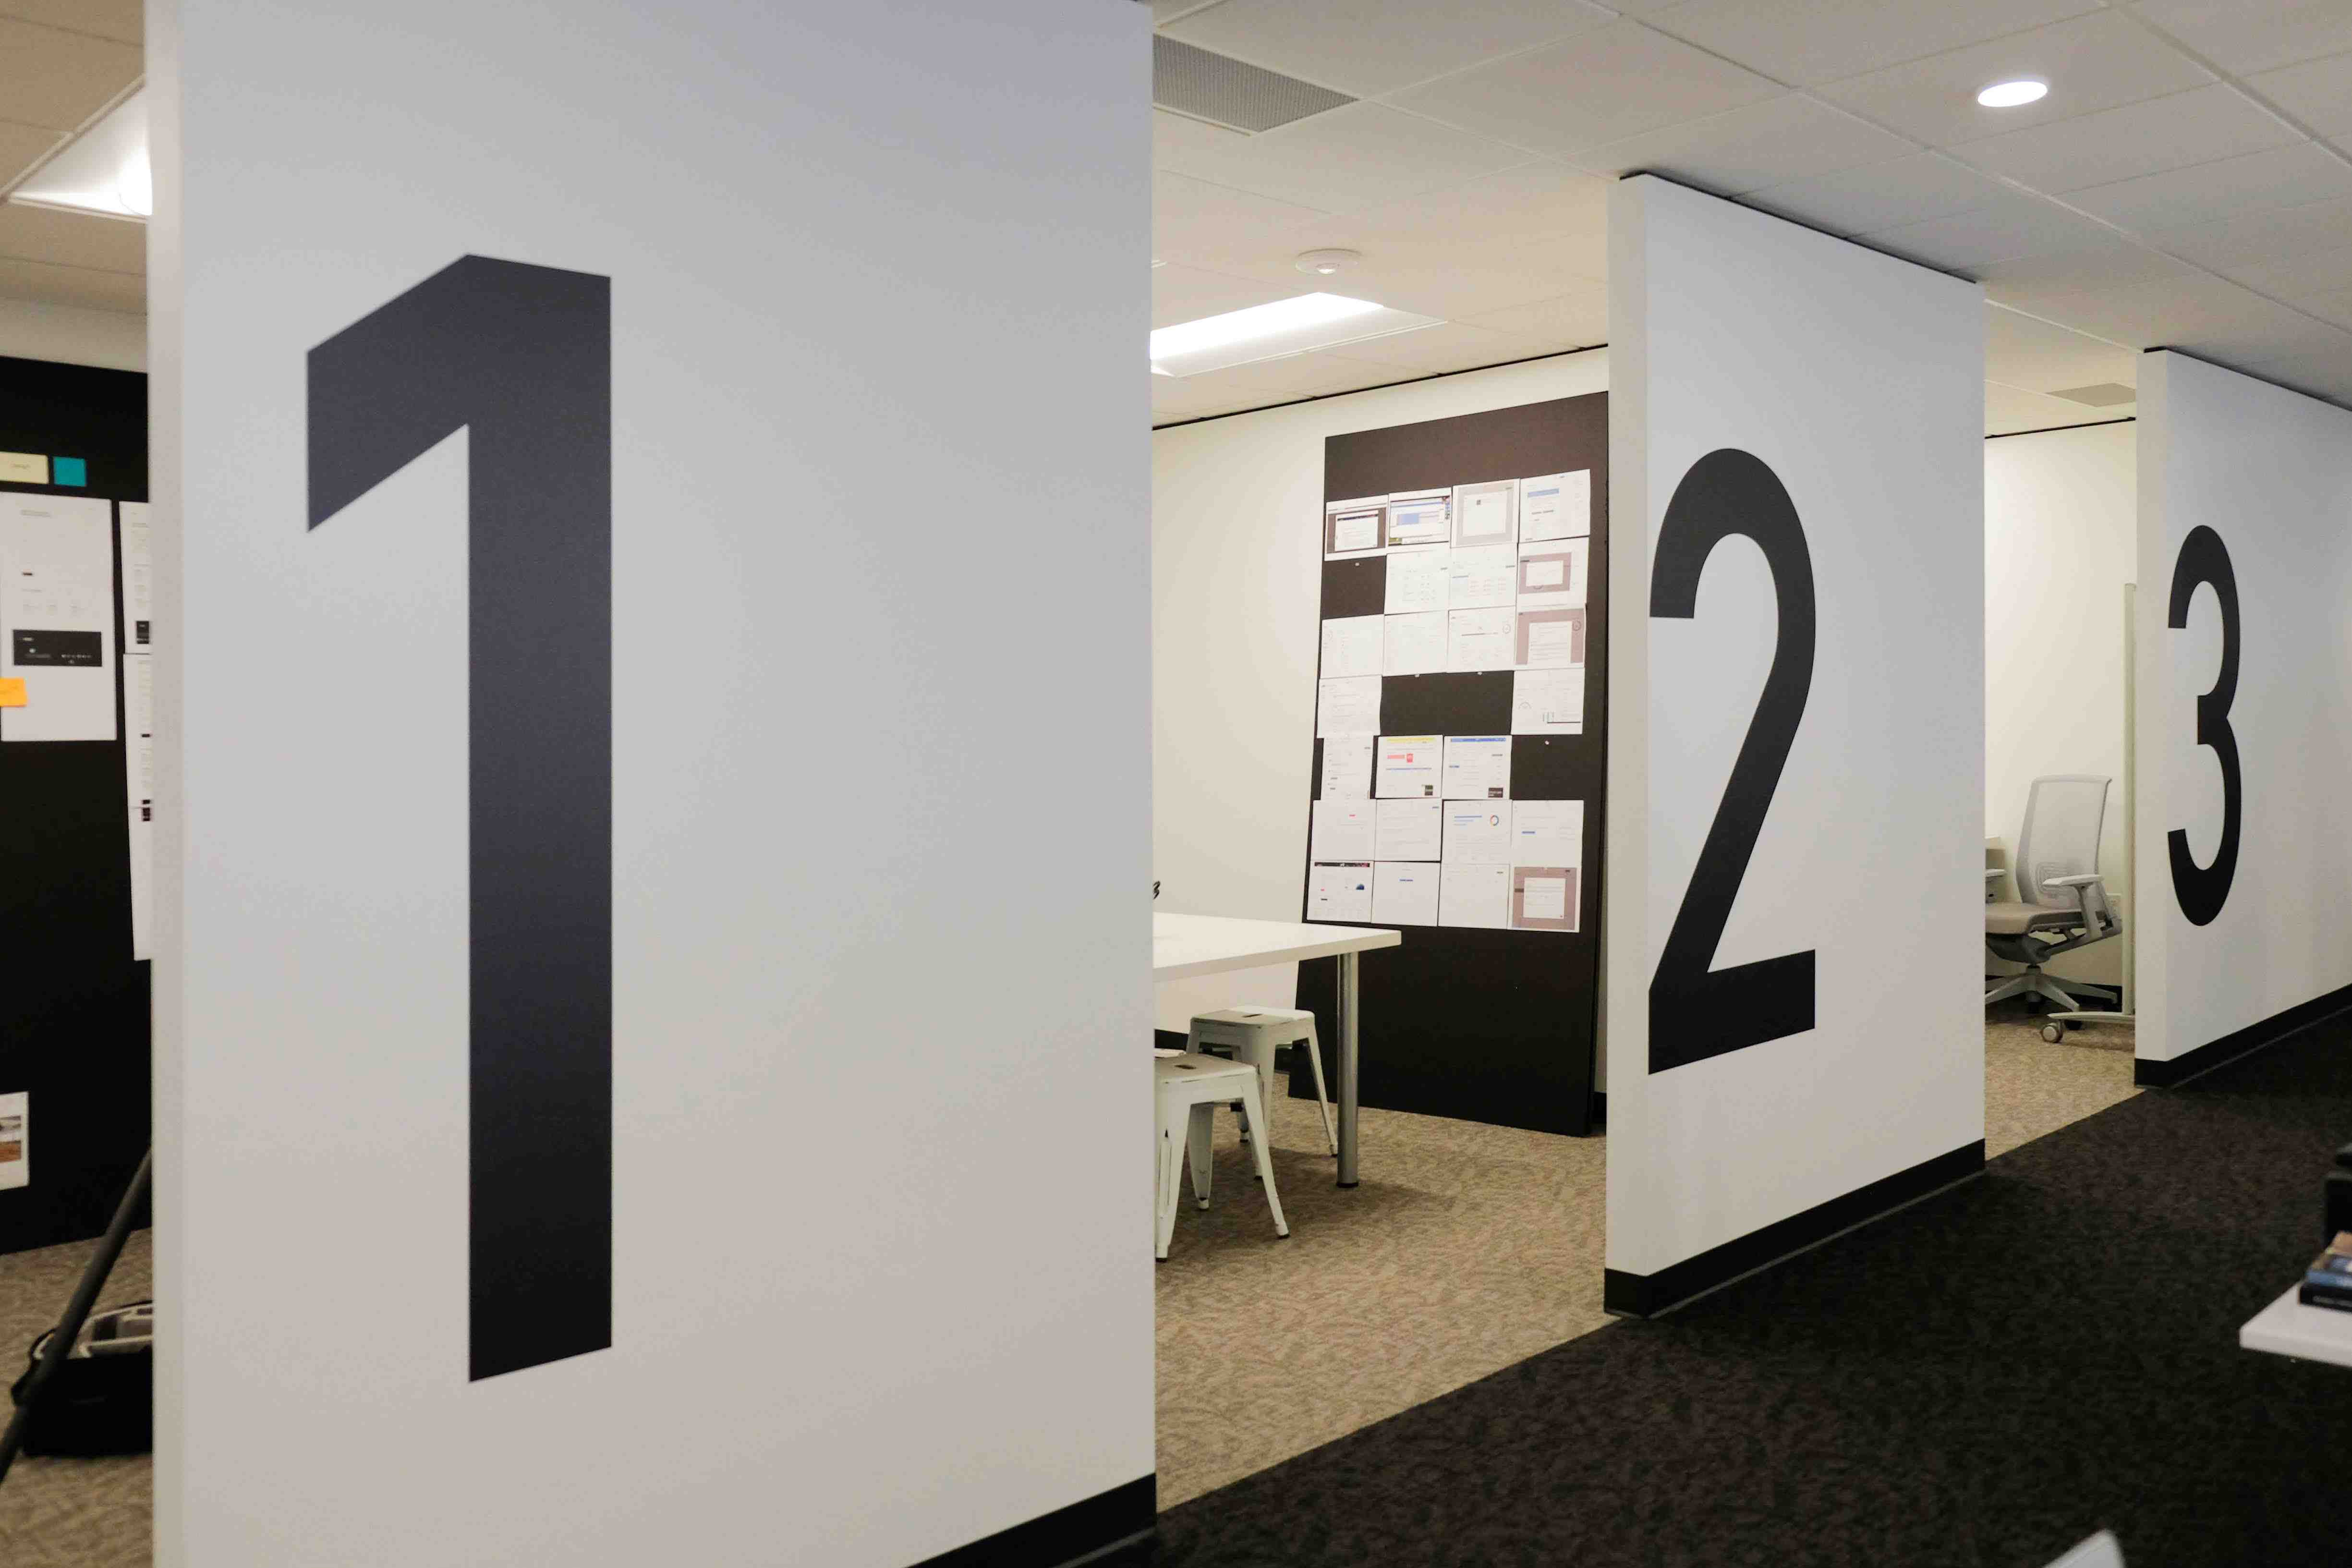 BlinkUx Seattle team rooms with number on walls